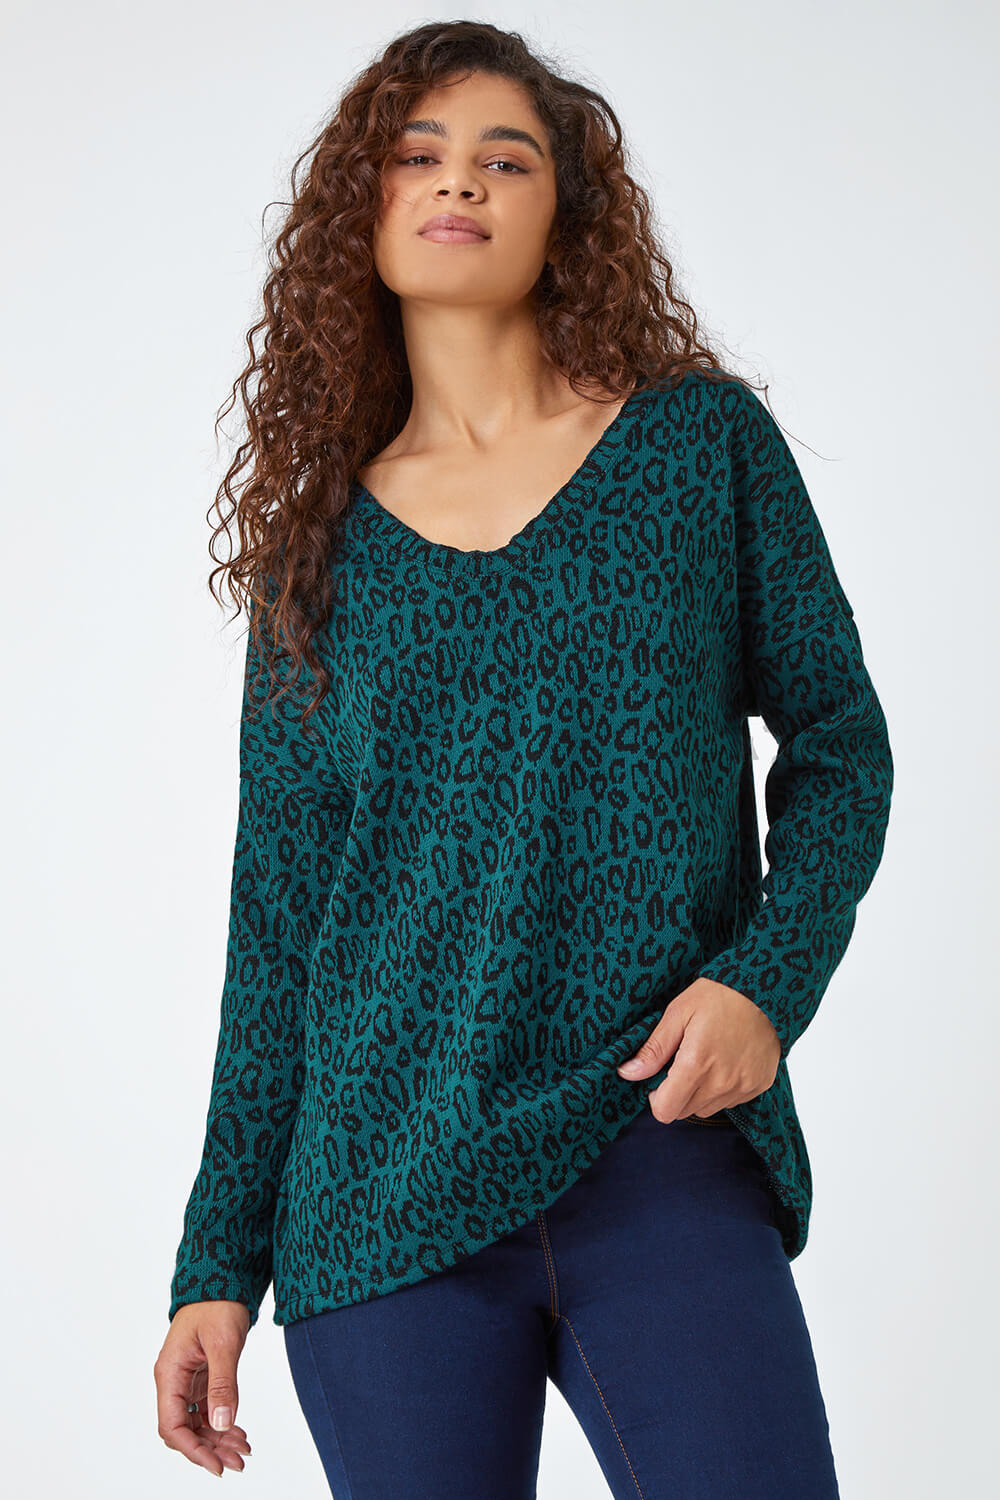 Teal Animal Print Tunic Stretch Top, Image 2 of 5